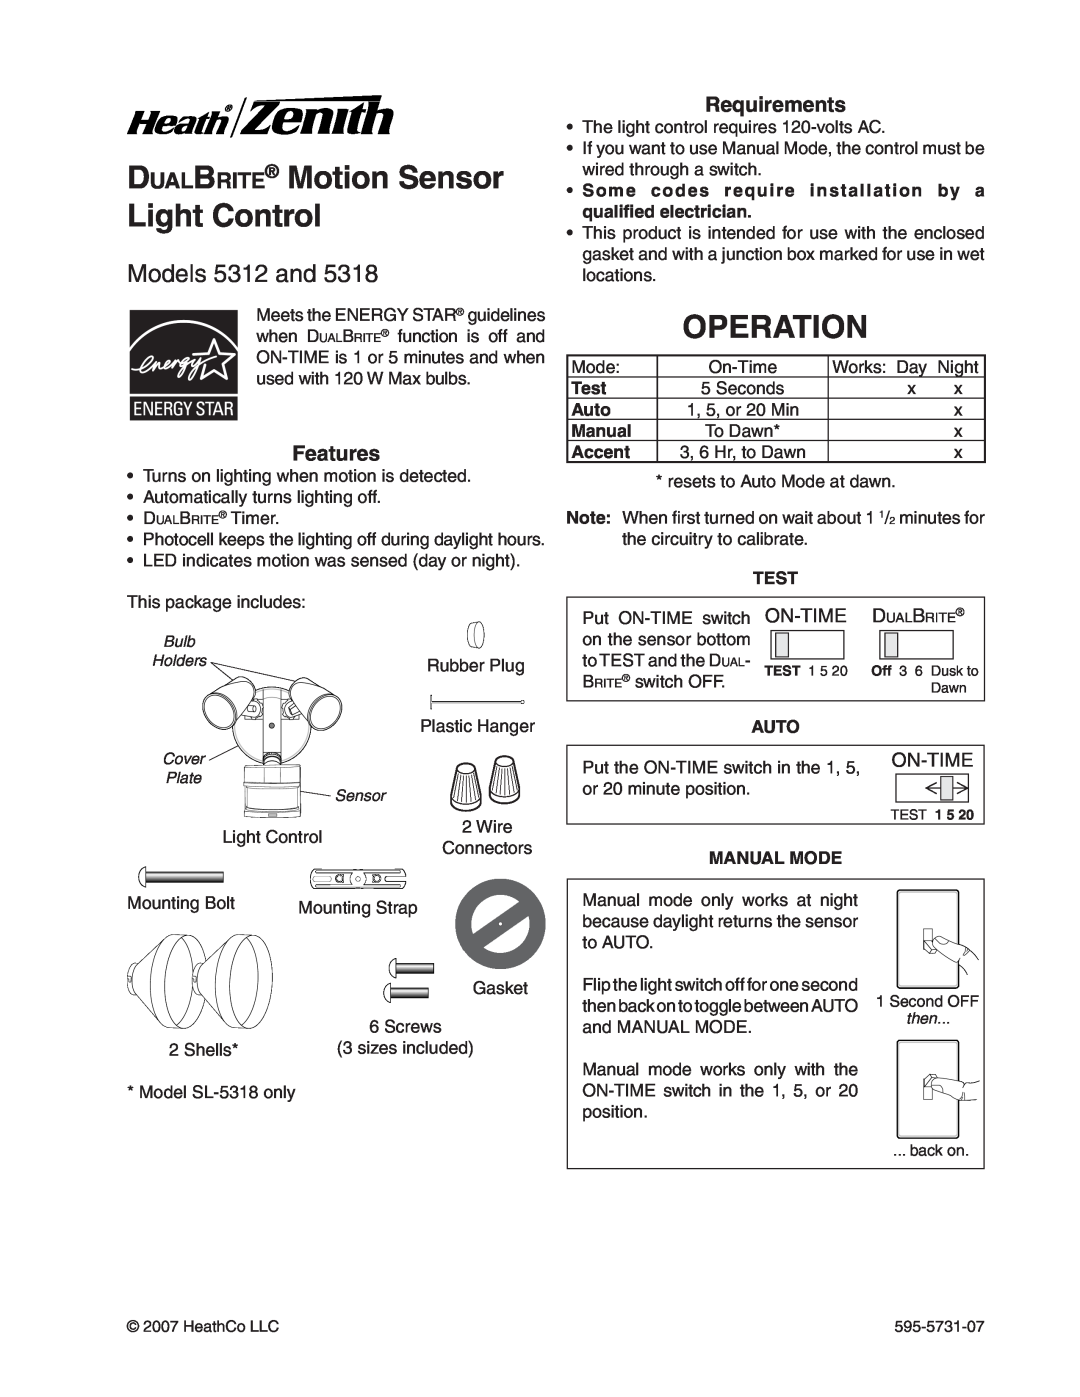 Heath Zenith 5318 manual DualBrite Motion Sensor Light Control, Operation, Models 5312 and, Features, Requirements, Wire 